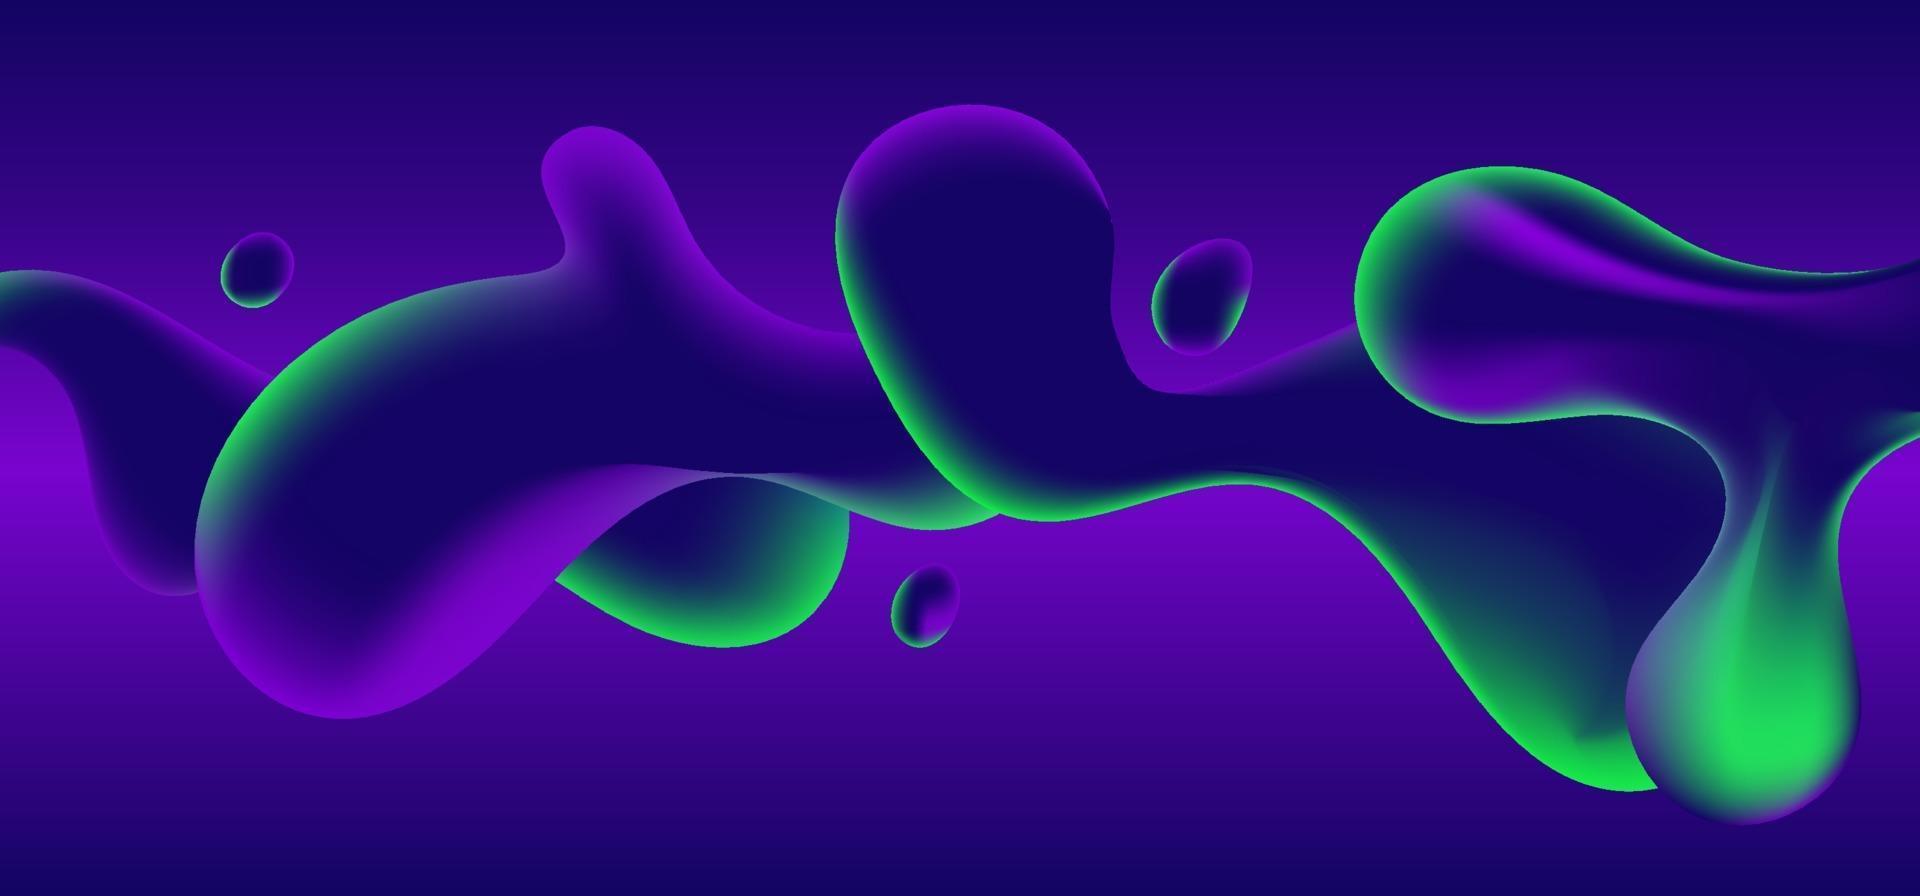 Abstract blue, green and purple gradient color liquid wavy shapes futuristic banner design background